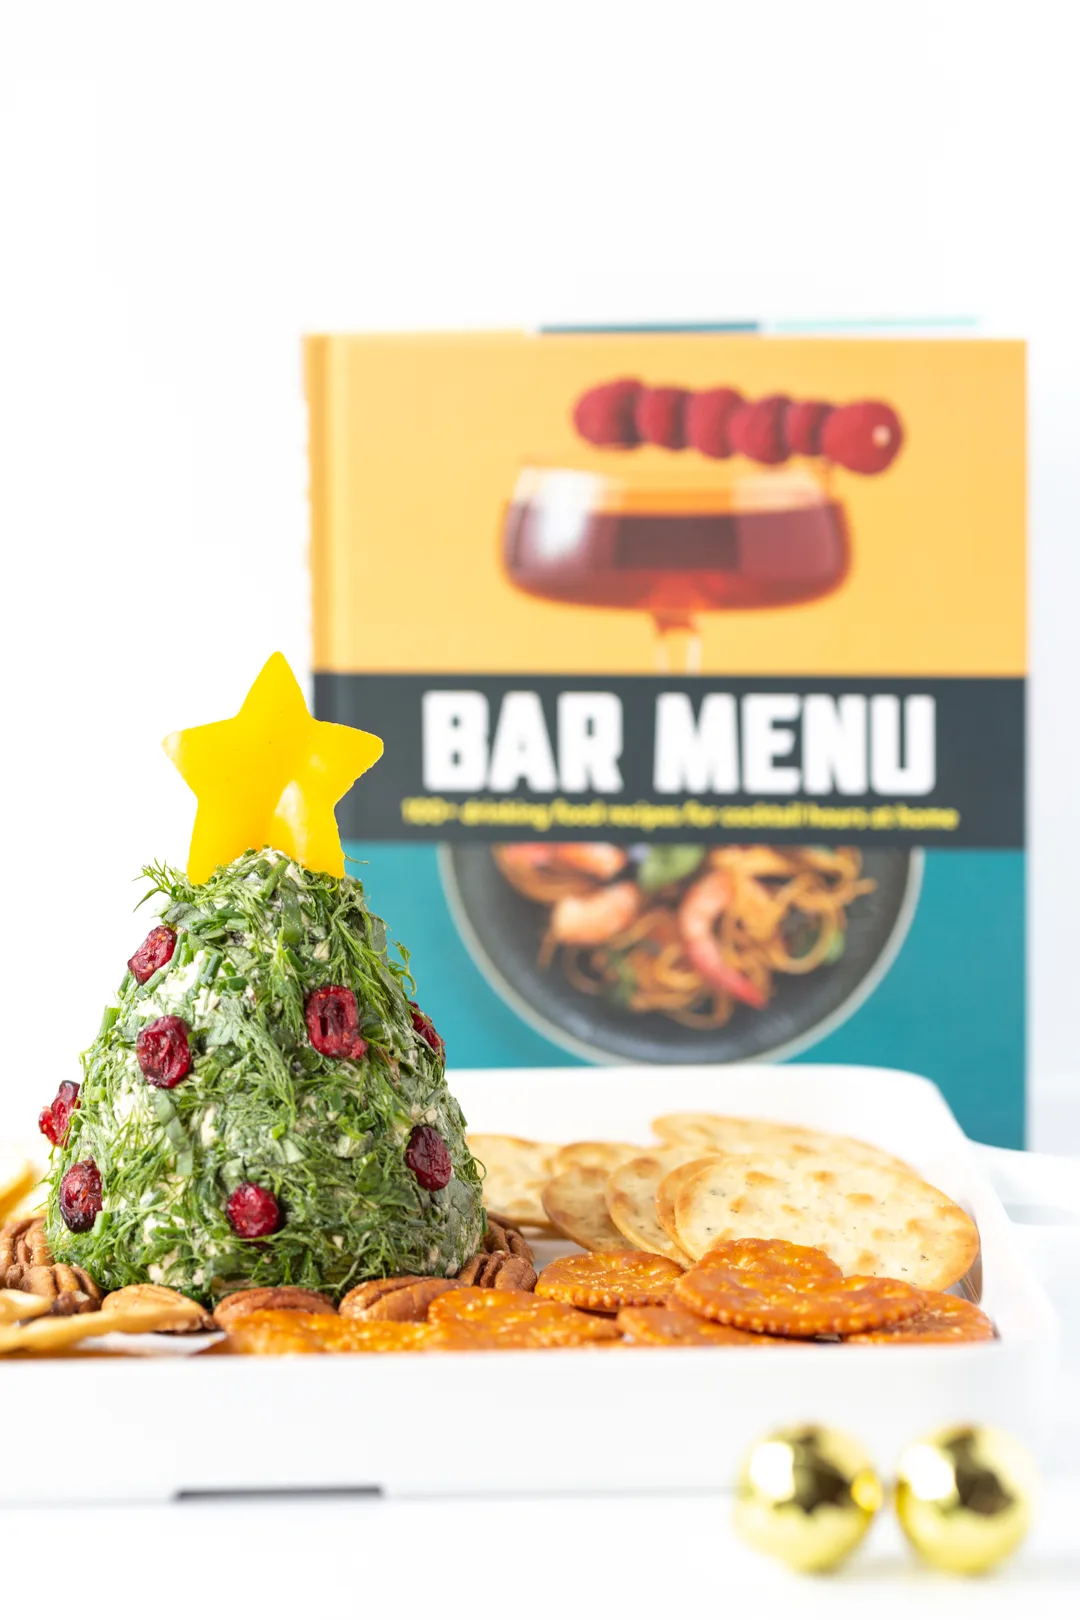 bar menu recipe book and cheese ball shaped like a christmas tree in forefront 